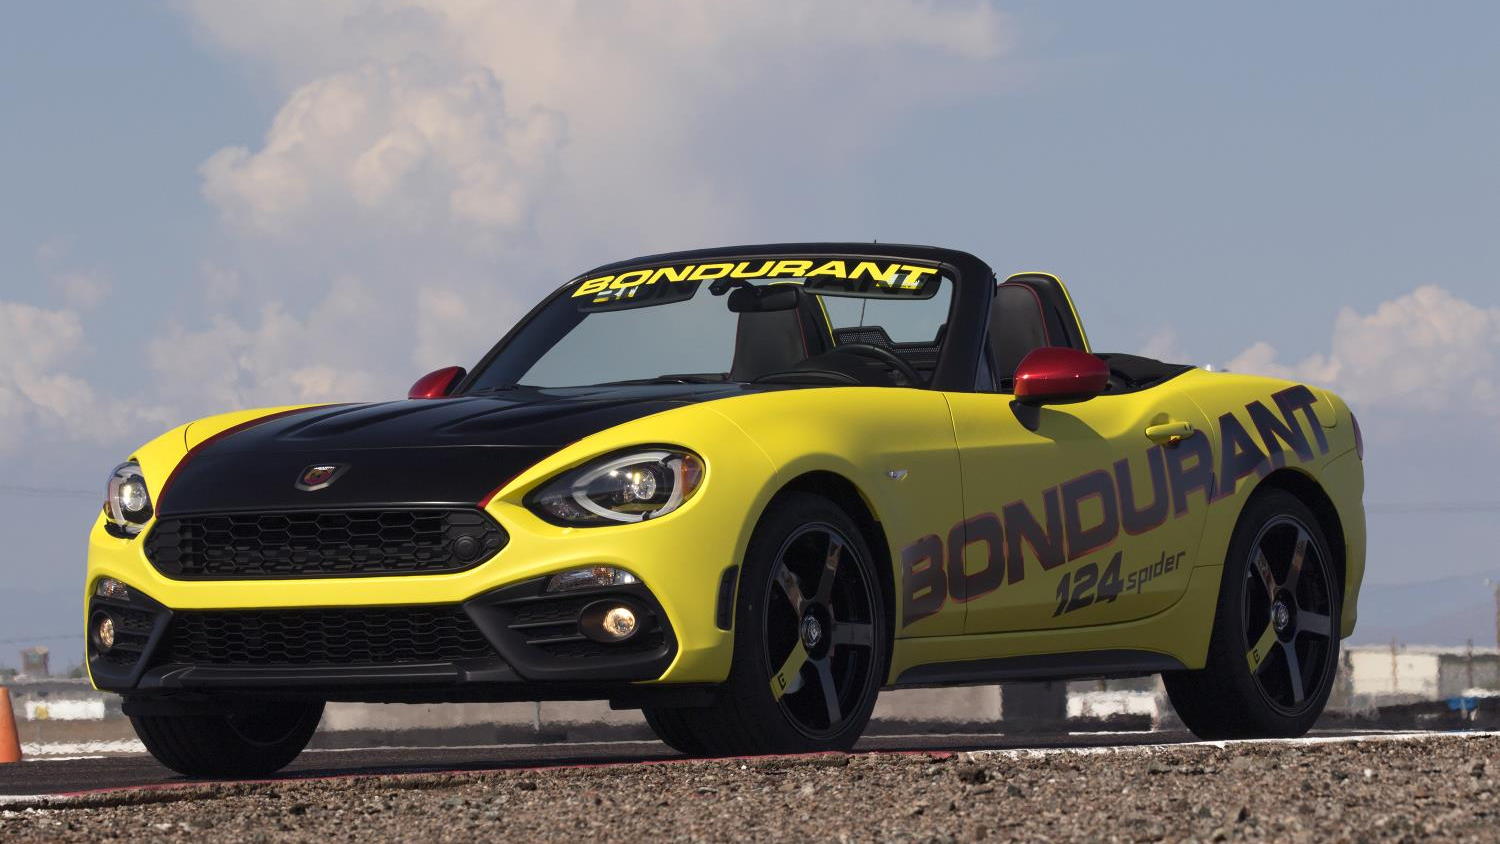 Fiat 124 Spider Abarth joins Bondurant for new Abarth Track Experience